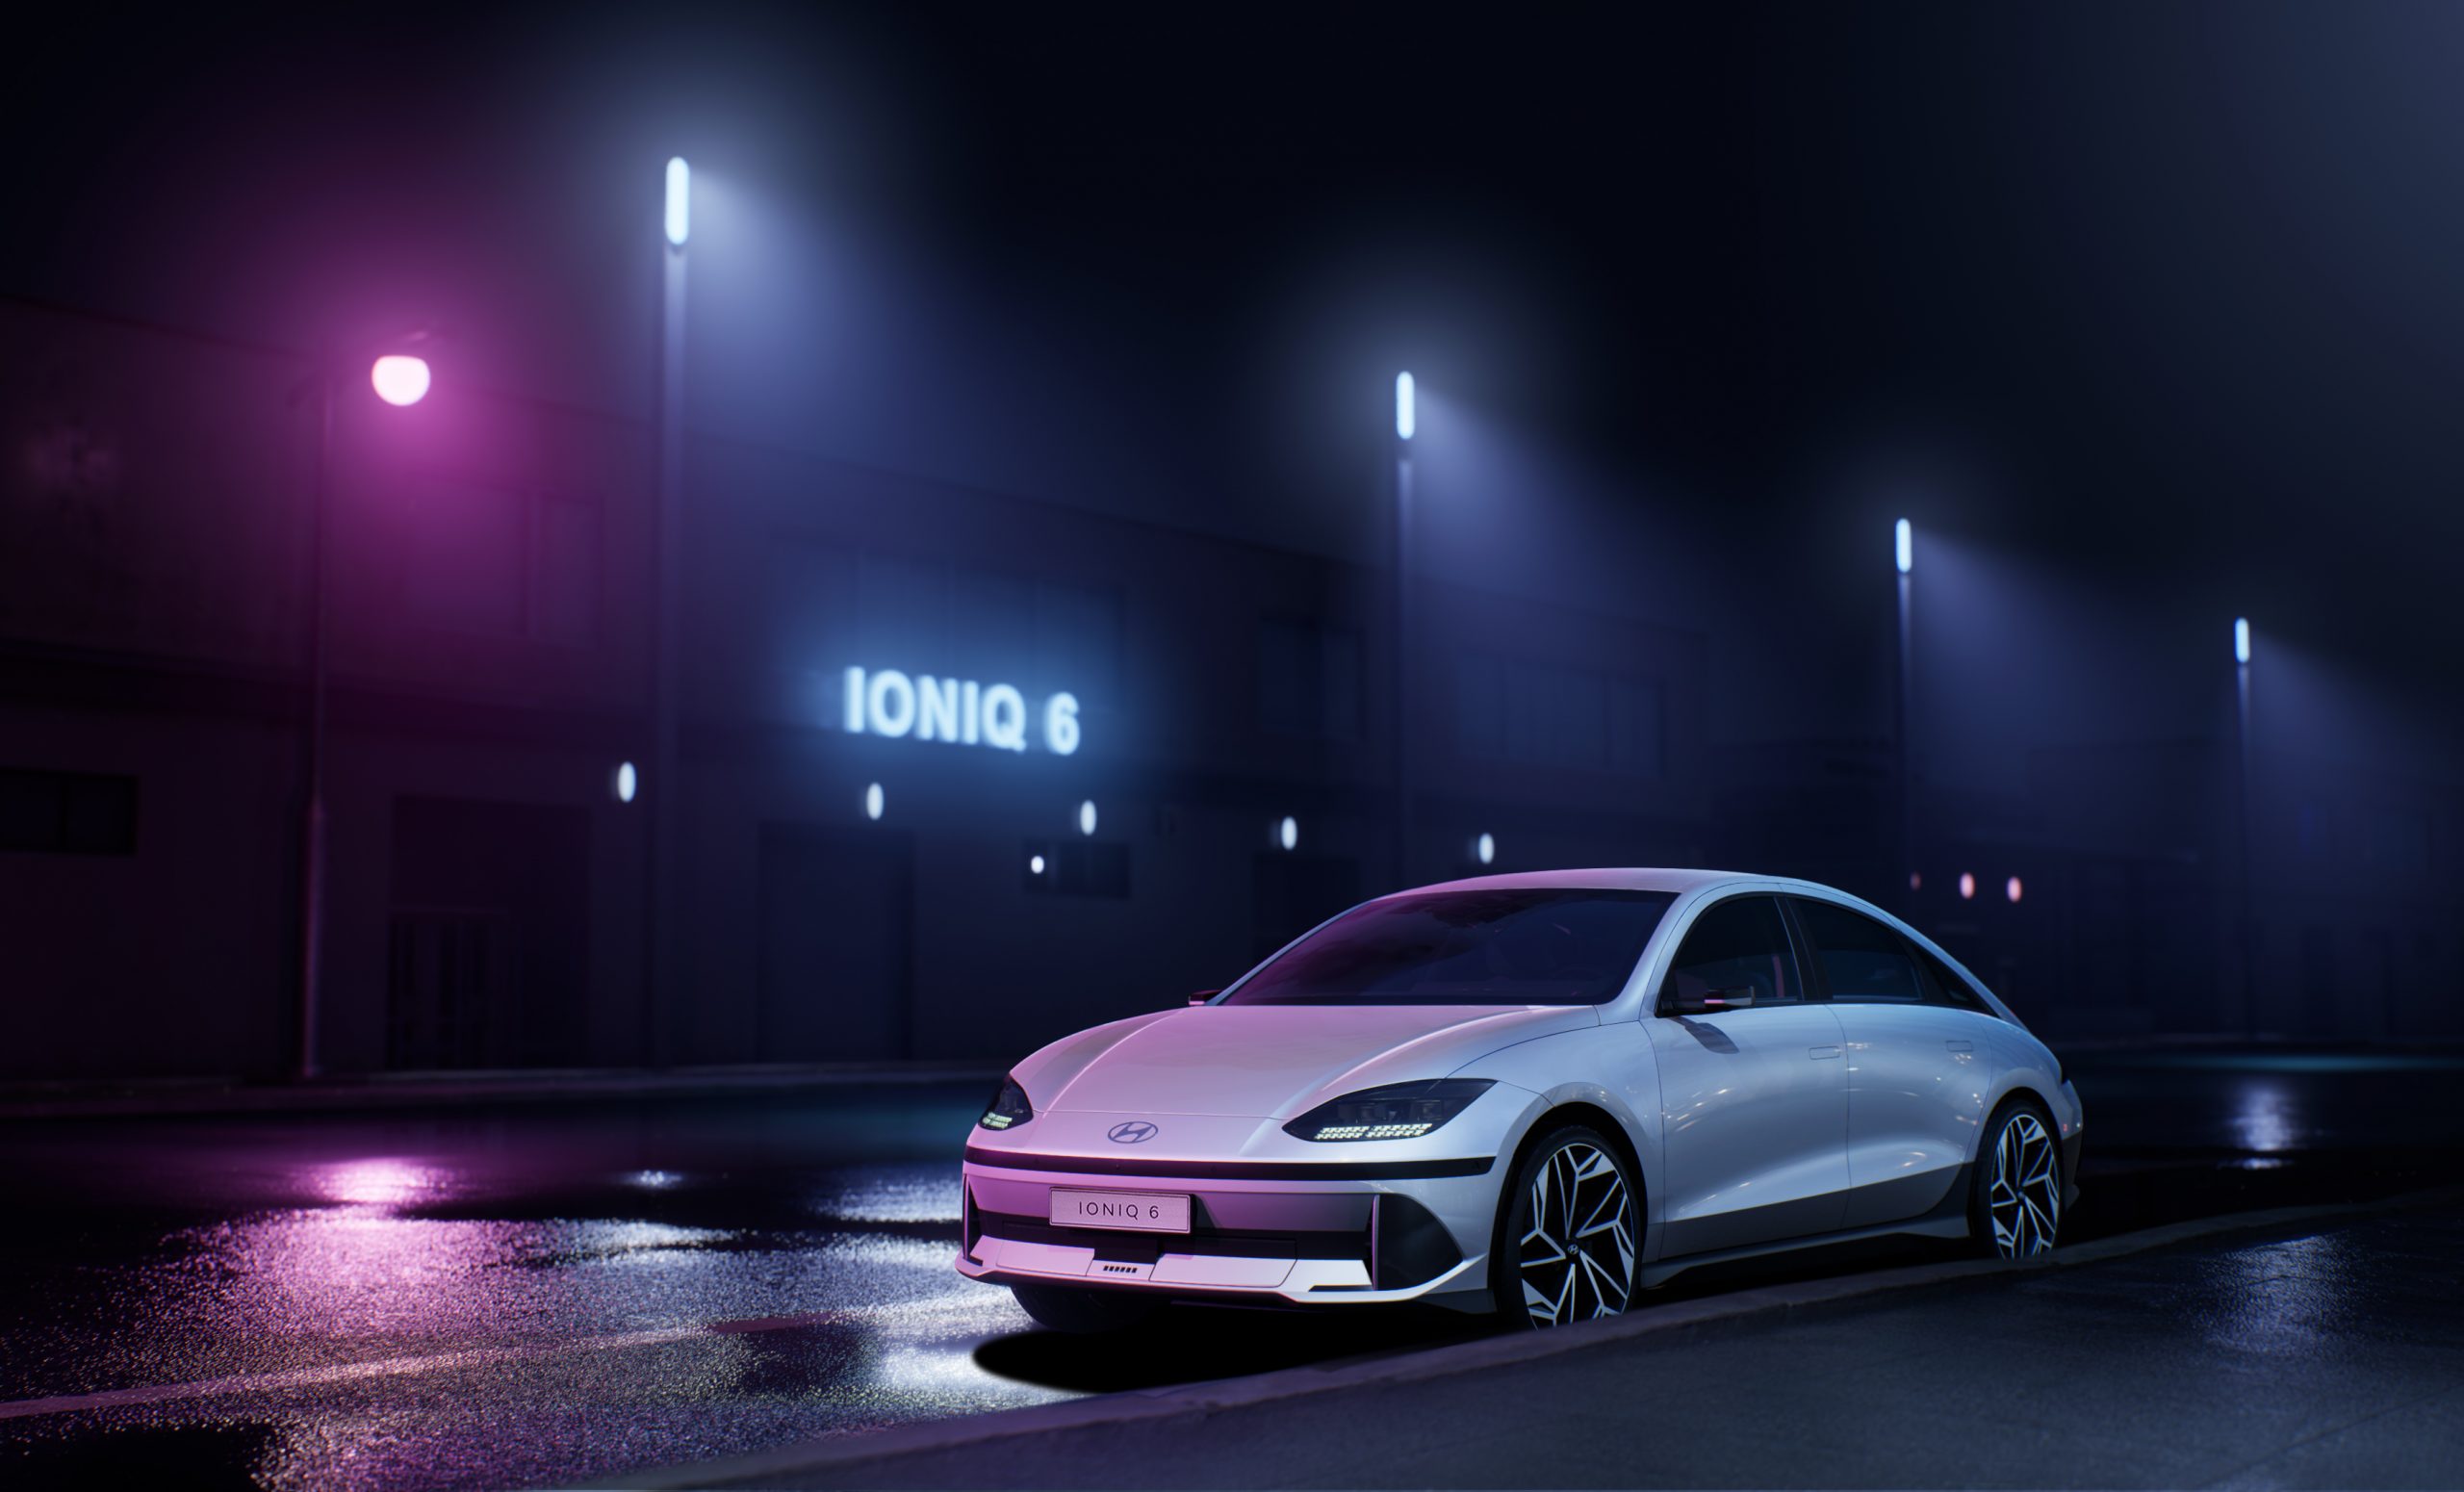 IONIQ 6: This is when the prophecy becomes true